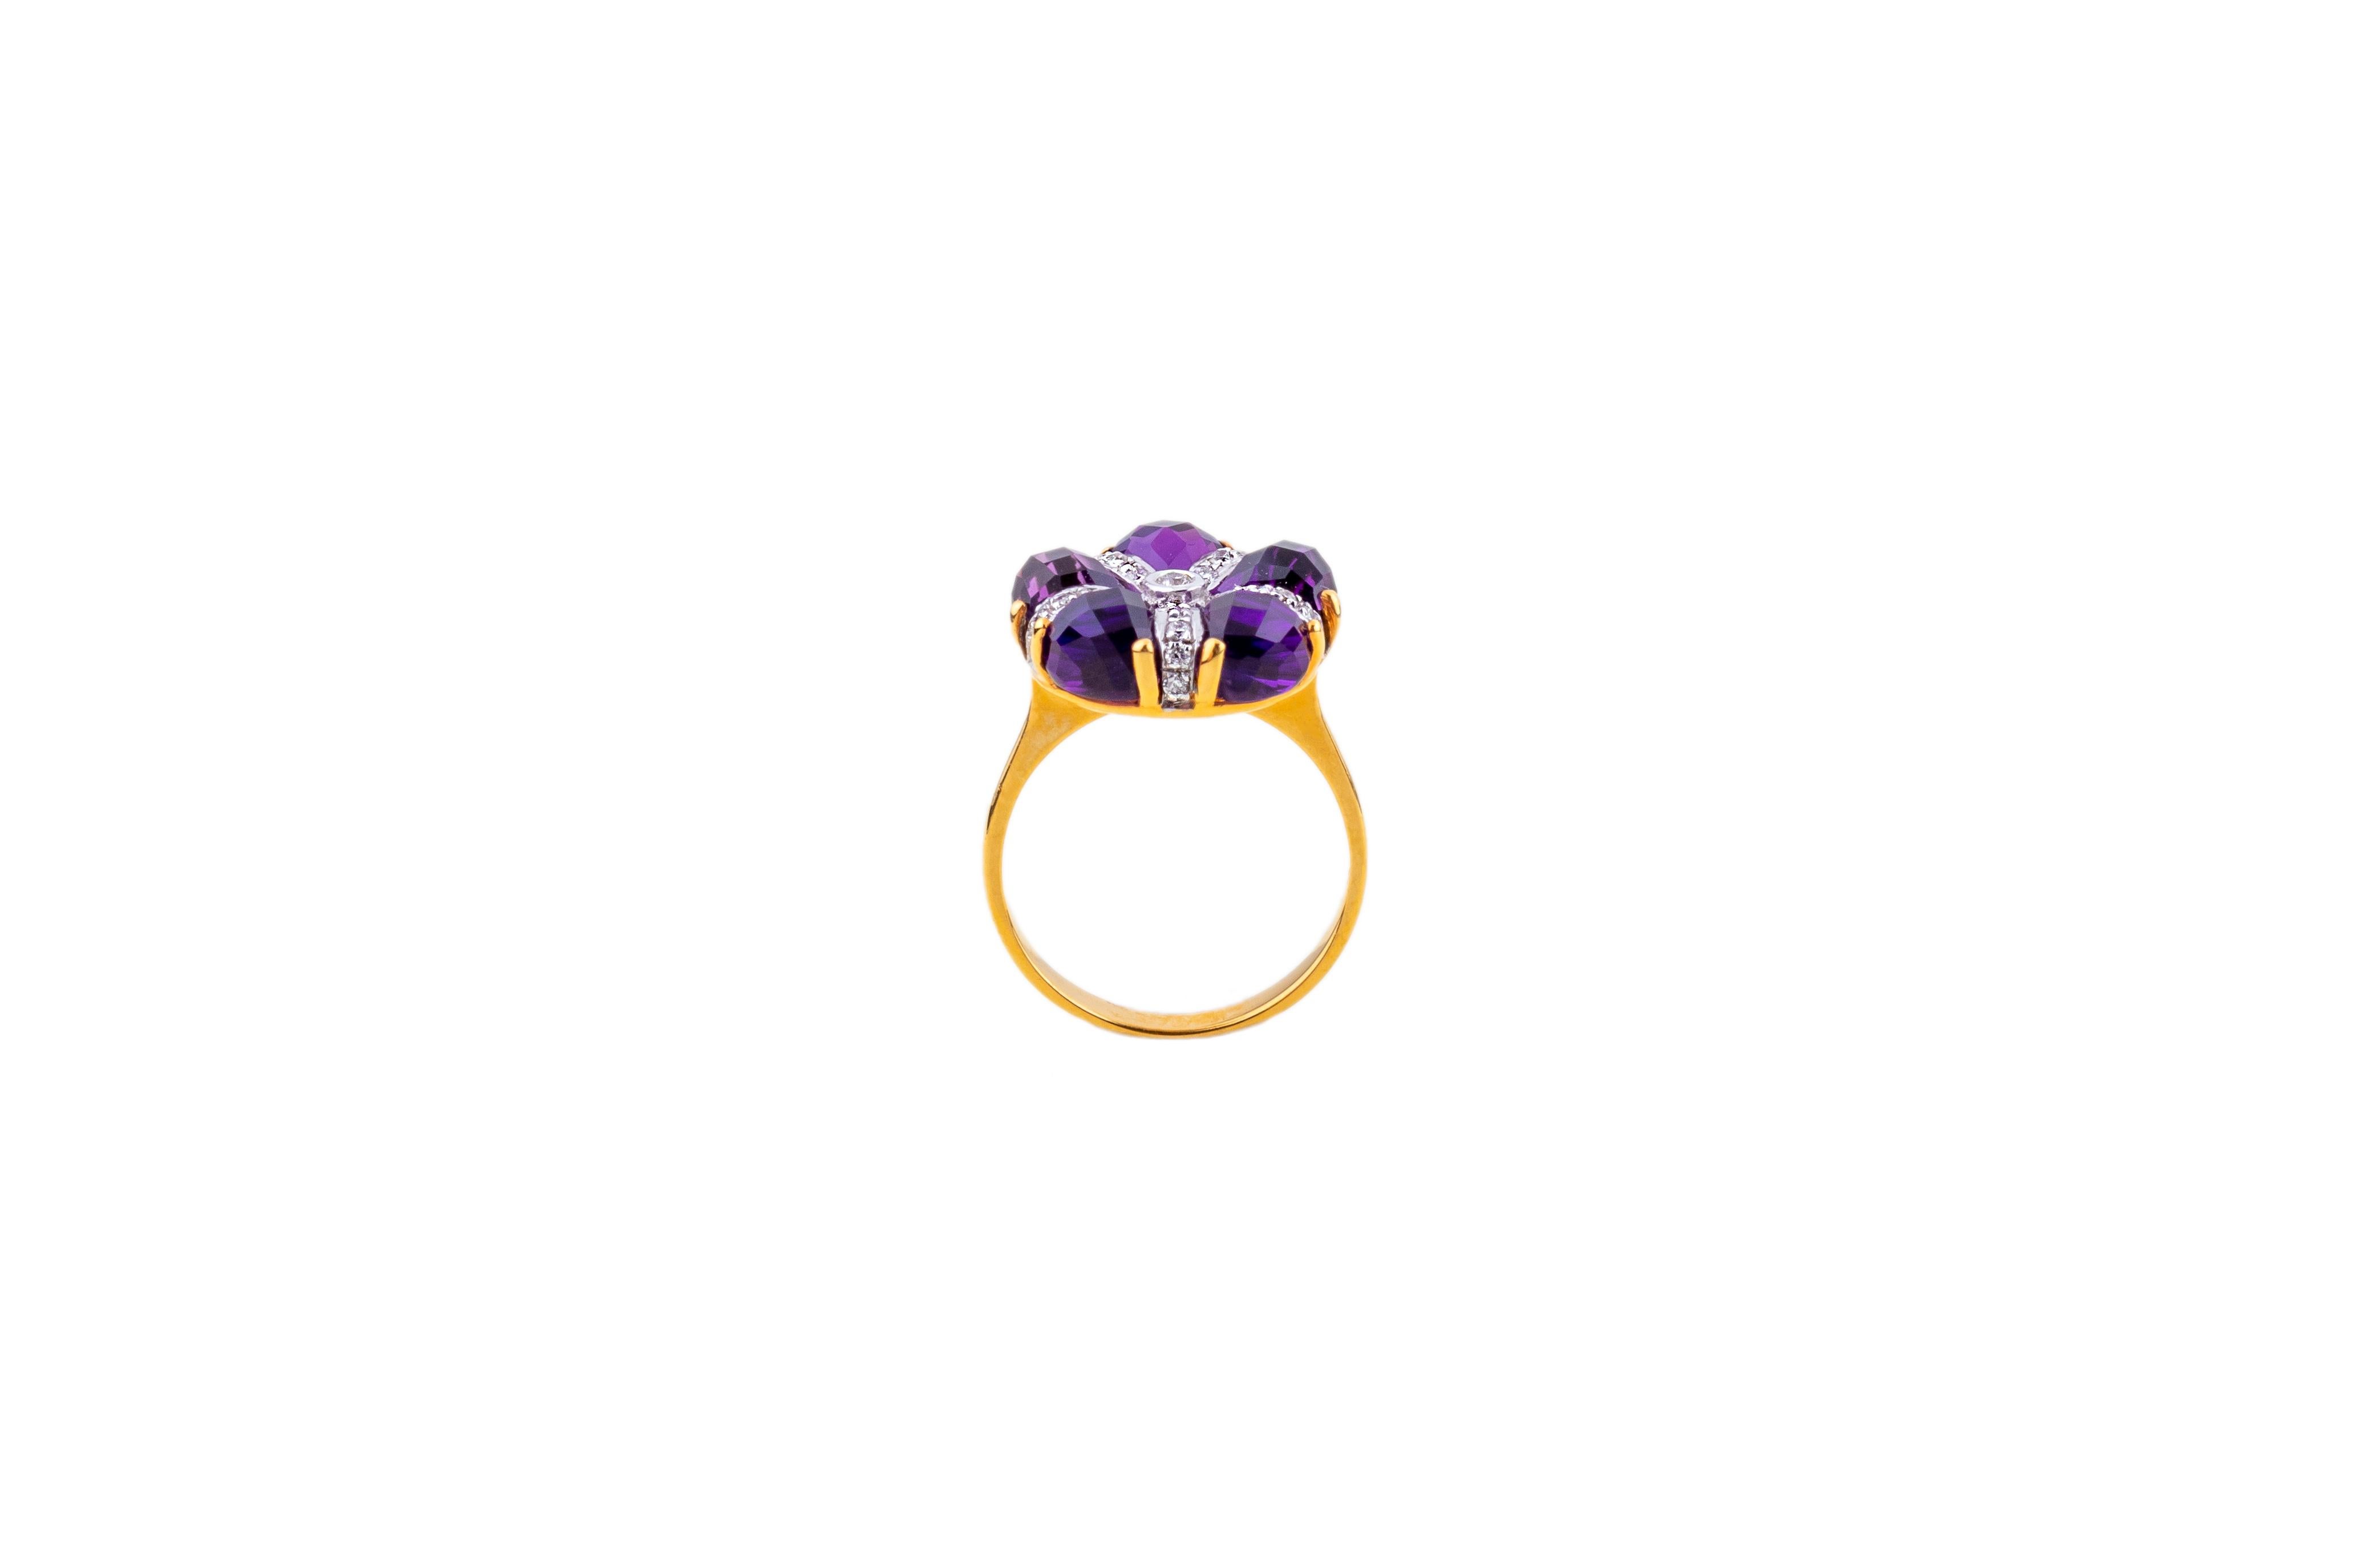 14k gold
punched 14k
5,60ct Amethysts
0,20ct diamonds
Ring size : 12/52